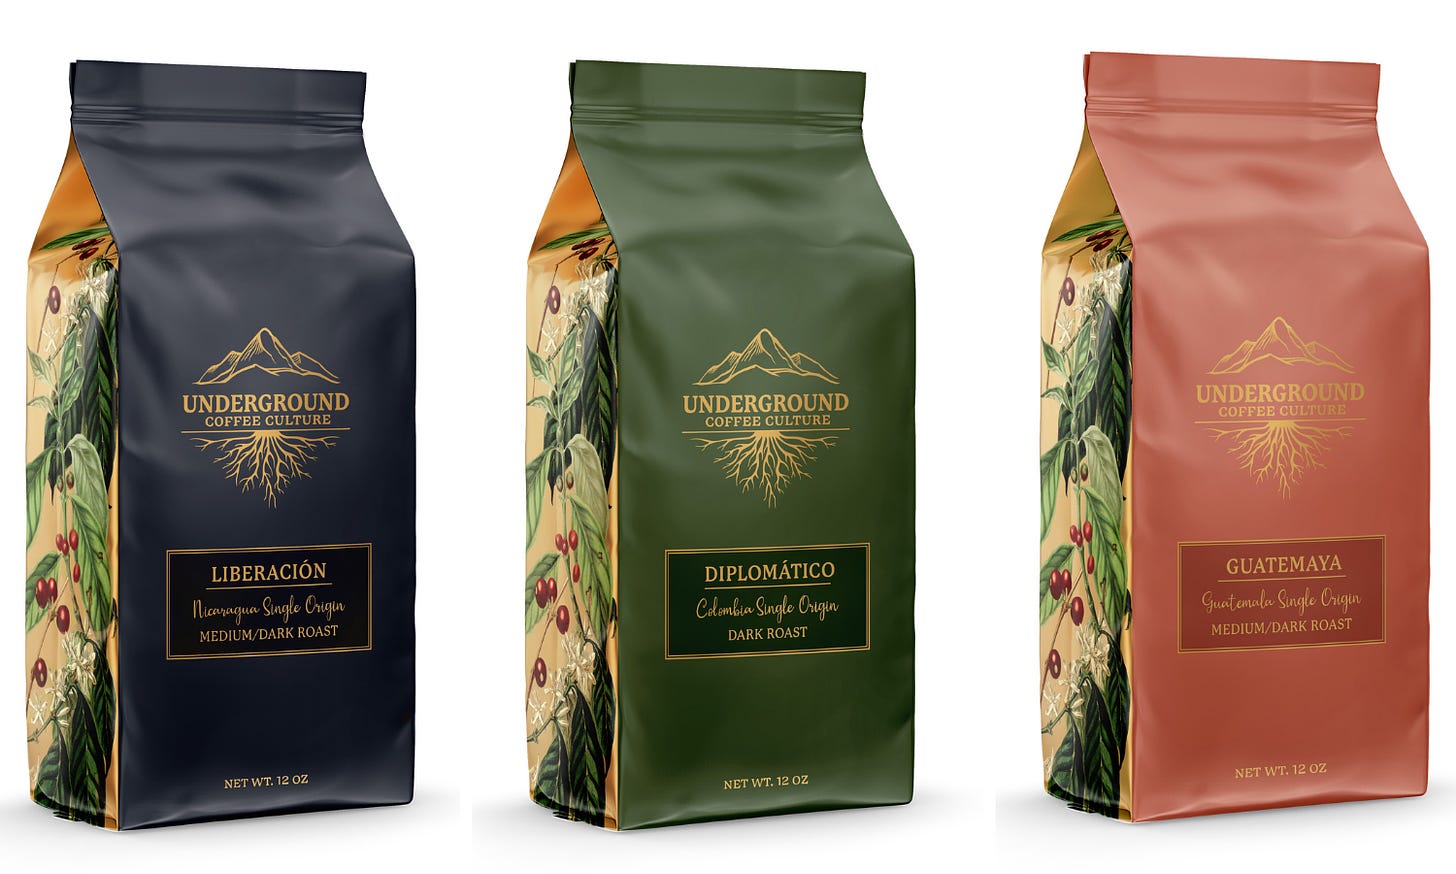 Three side by side 3/4 view images of coffee bags for Underground Coffee Culture. Each bag features their gold logo with name split between a mountain line drawing above and roots below on a solid color. Side panels feature artistic drawings of coffee plants with cherry.